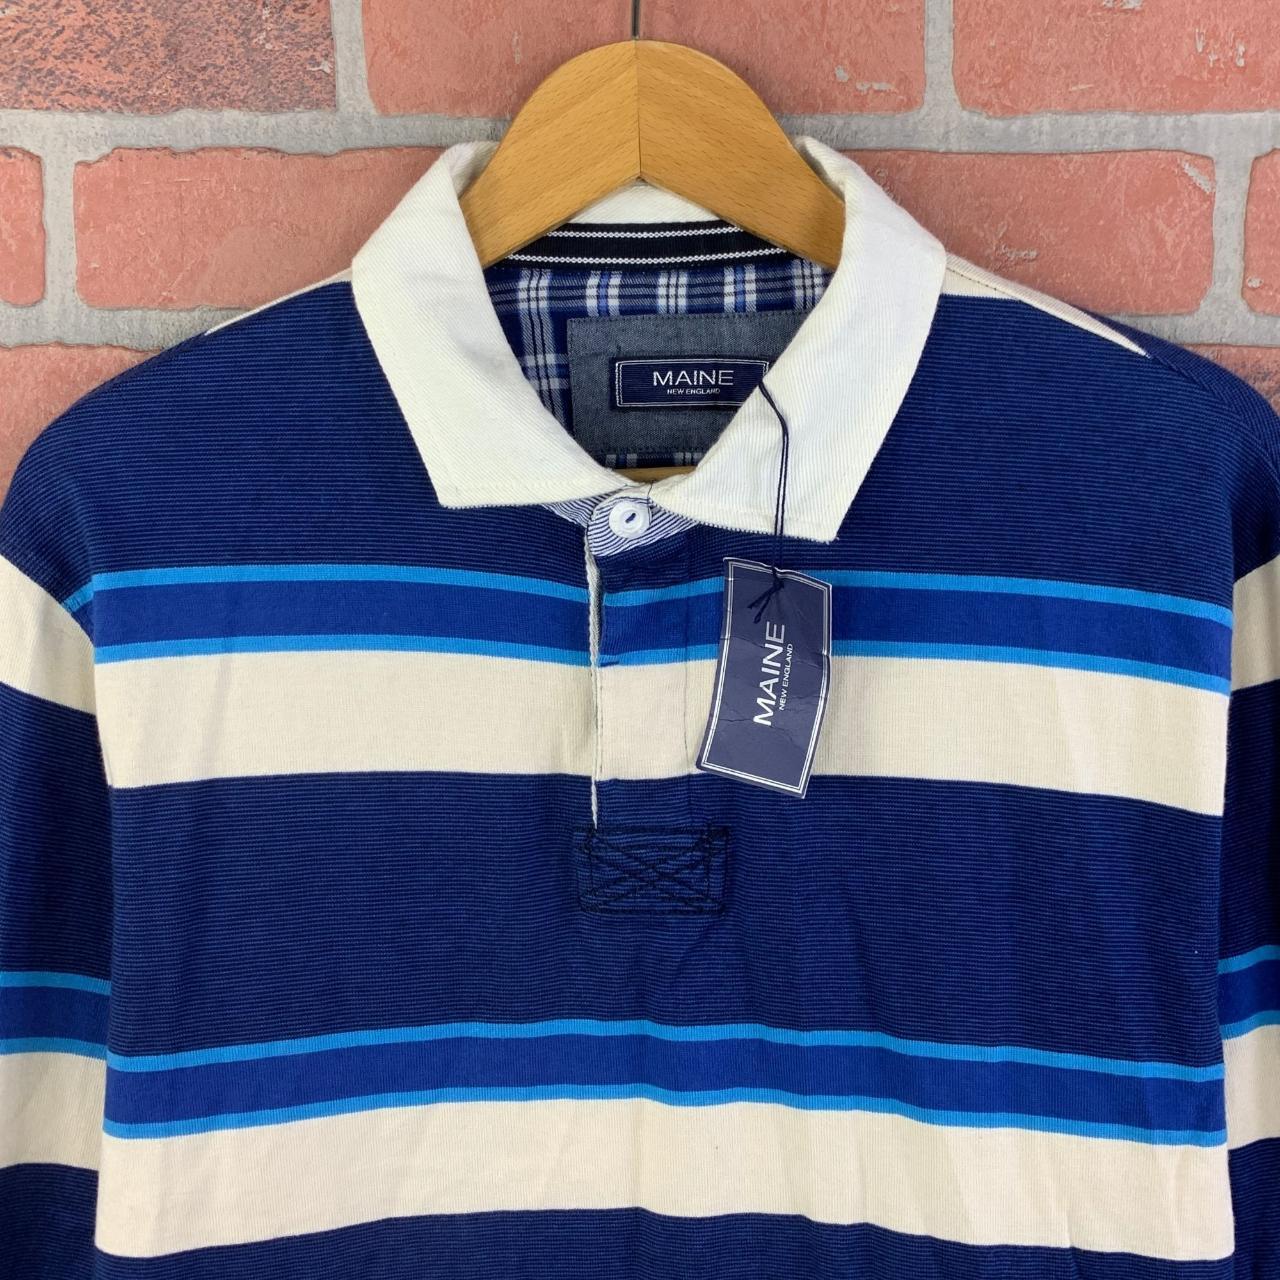 Maine Men's White and Blue Polo-shirts | Depop